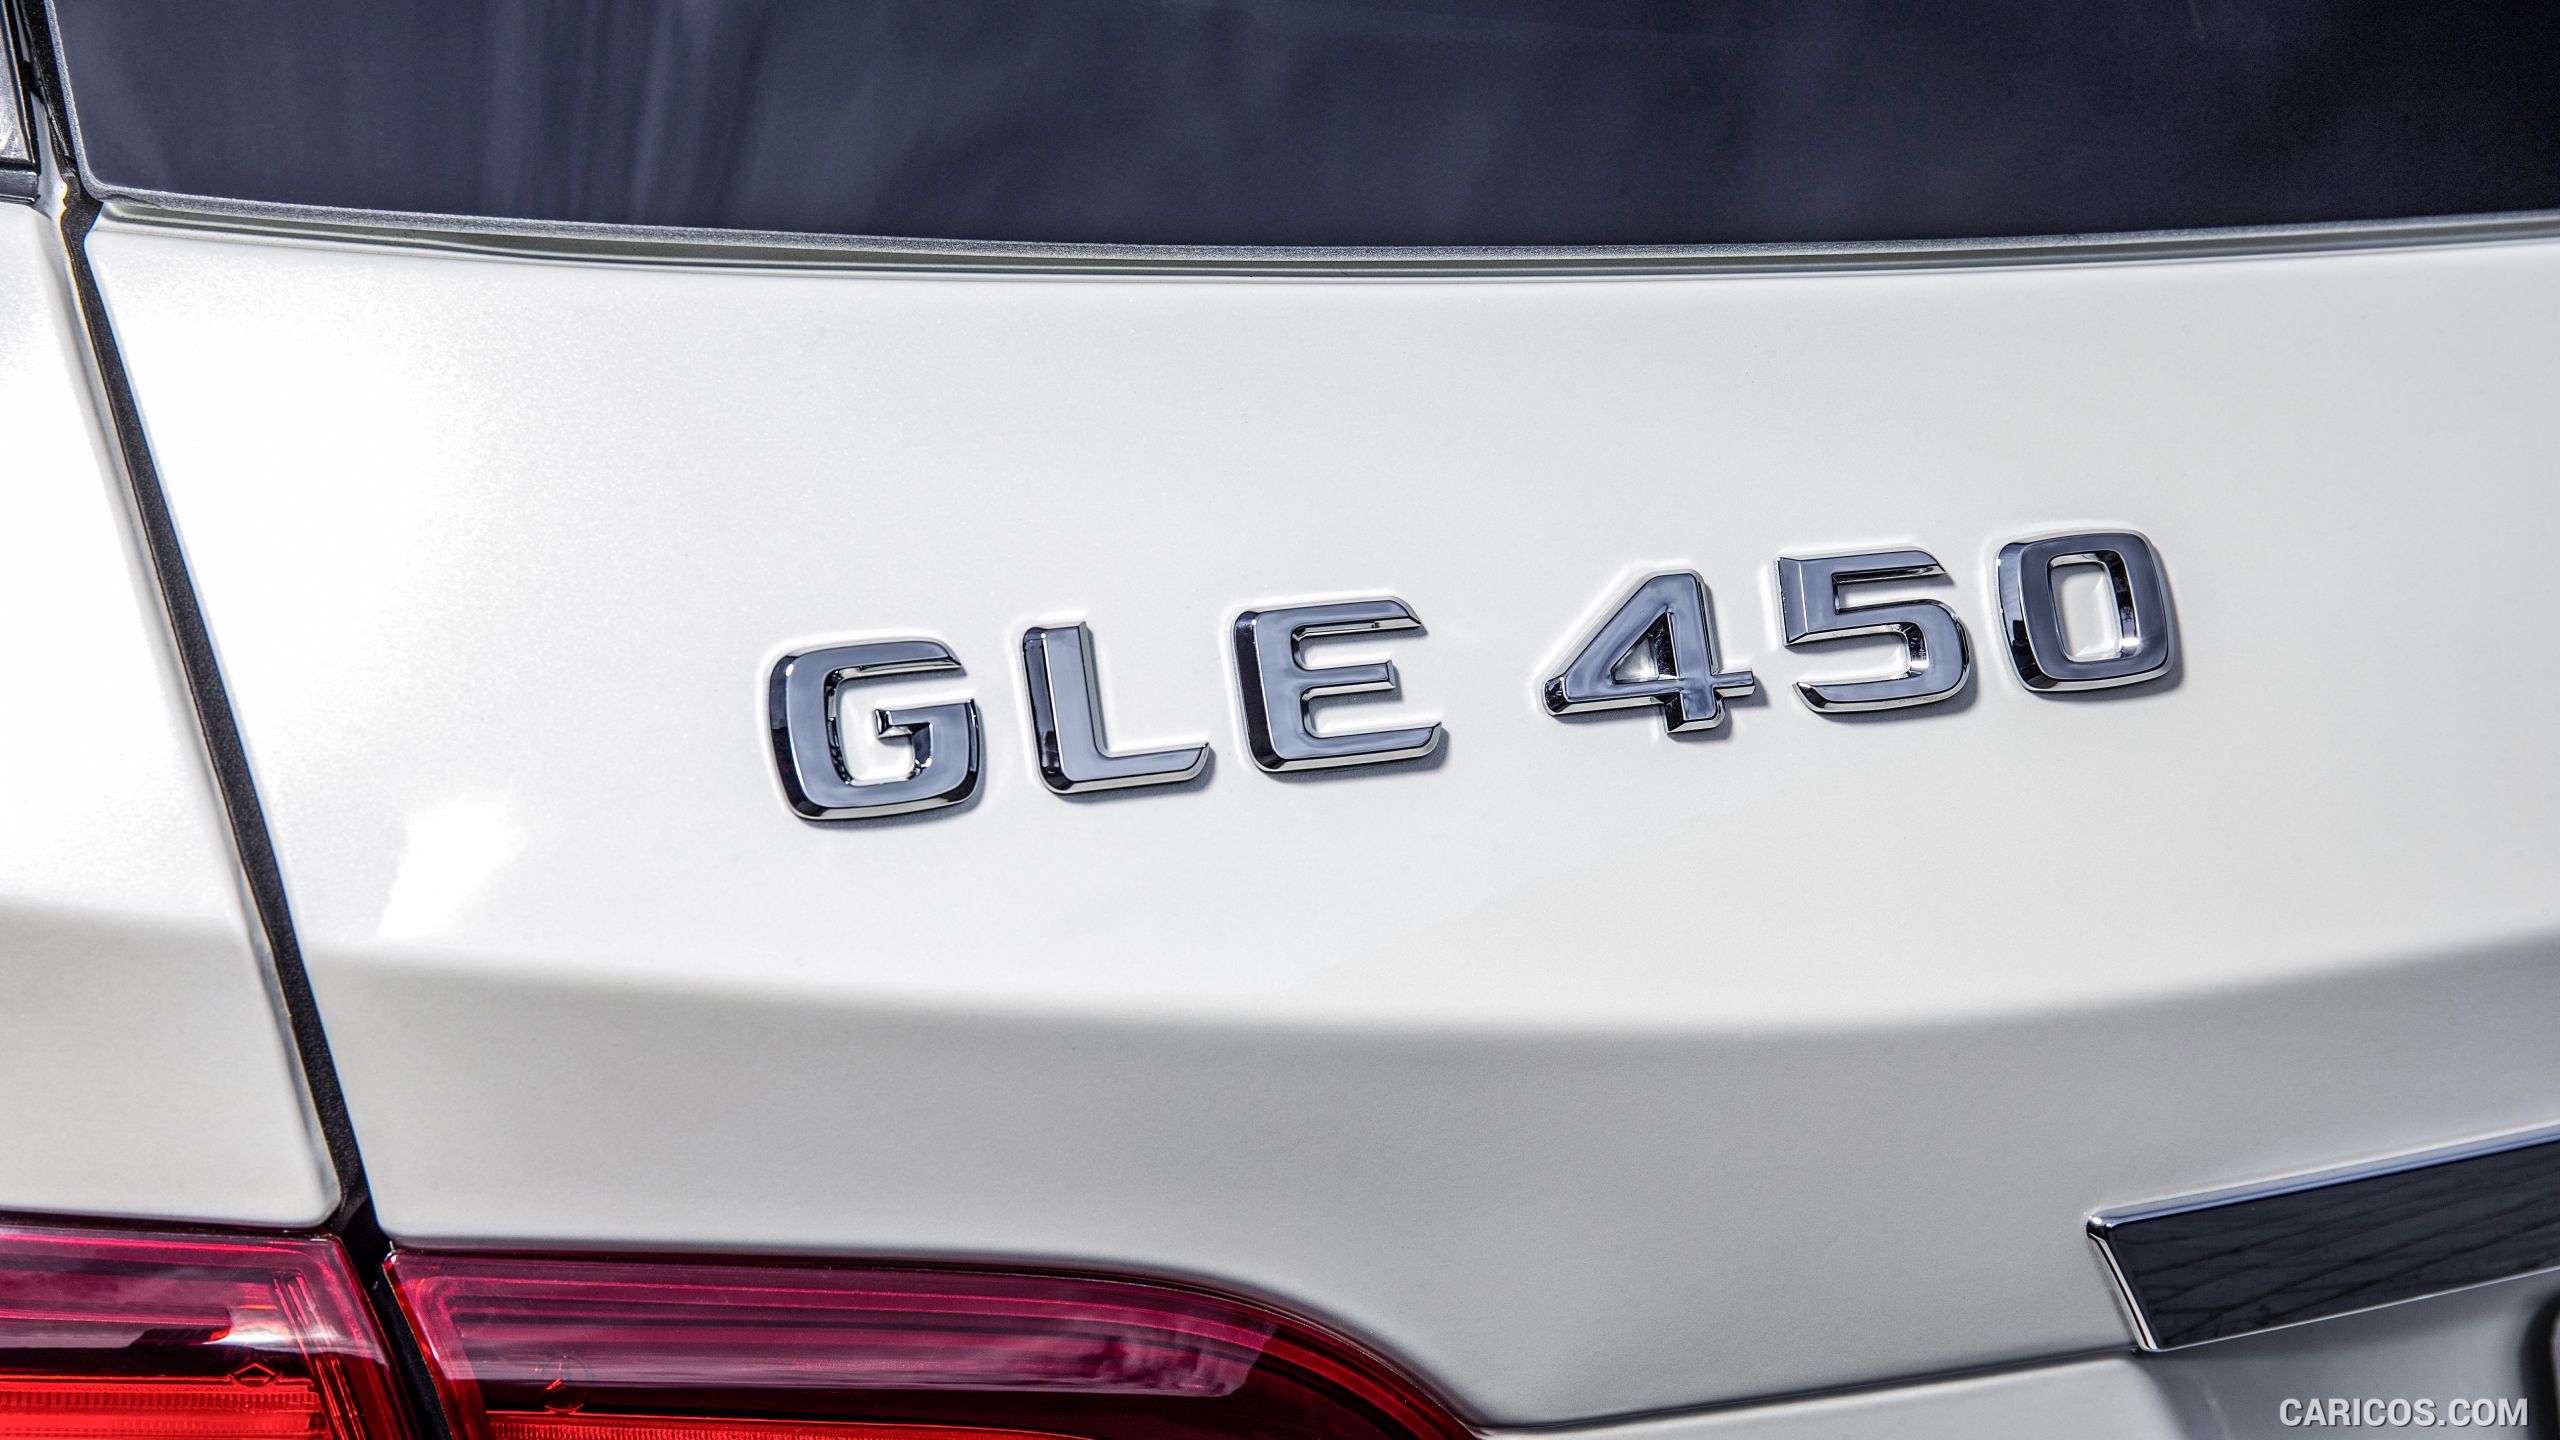 2016 Mercedes-Benz GLE 450 AMG 4MATIC - Badge, #8 of 11